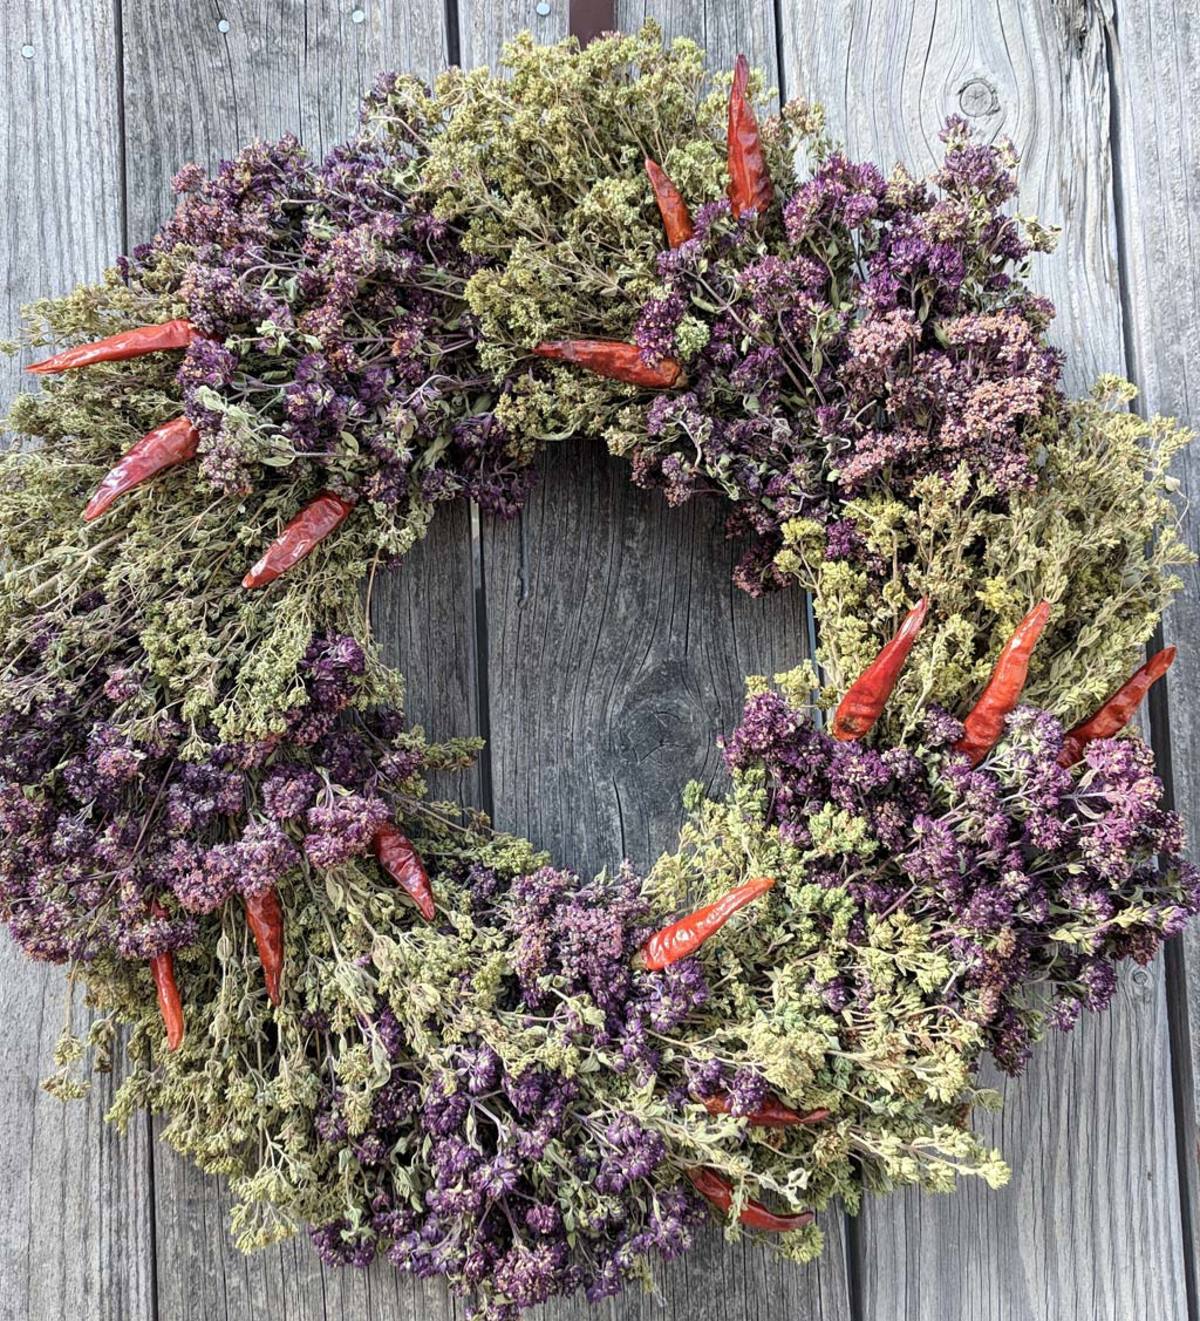 Colorful Dried Herb Wreath with Chili Pepper Accents